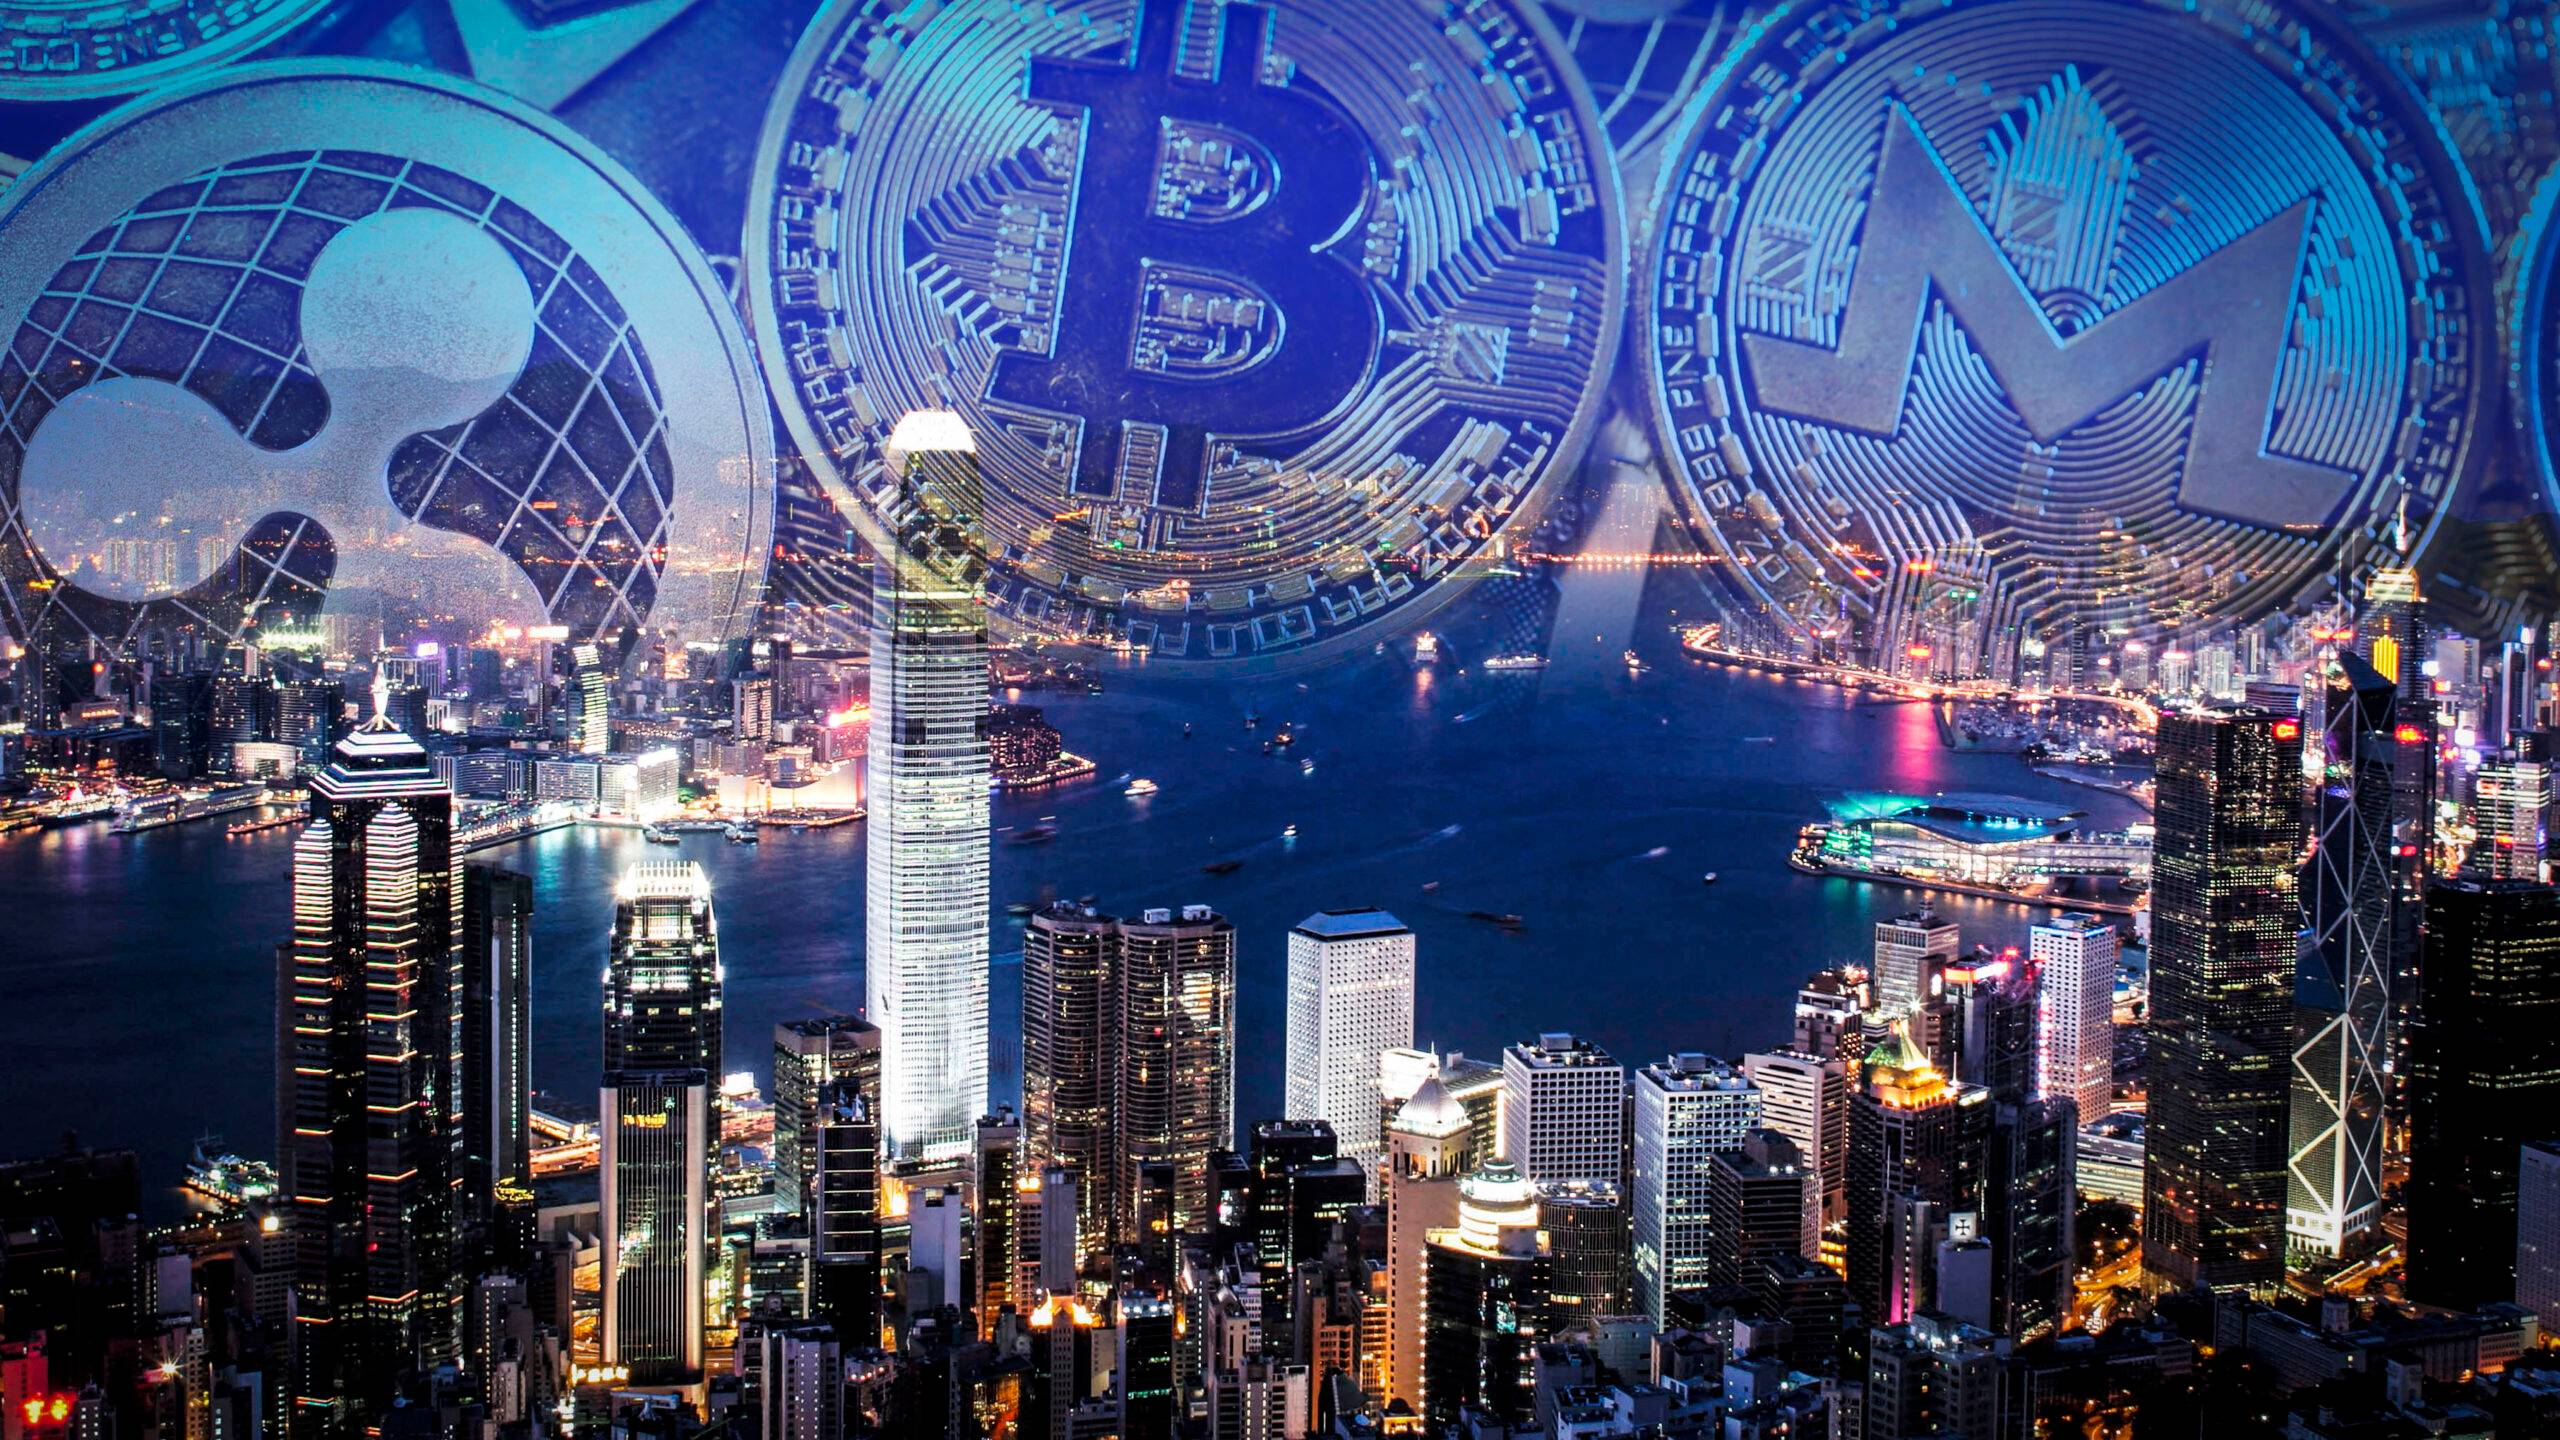 Hong Kong Identifies 7 Crypto Exchanges for Regulatory Noncompliance